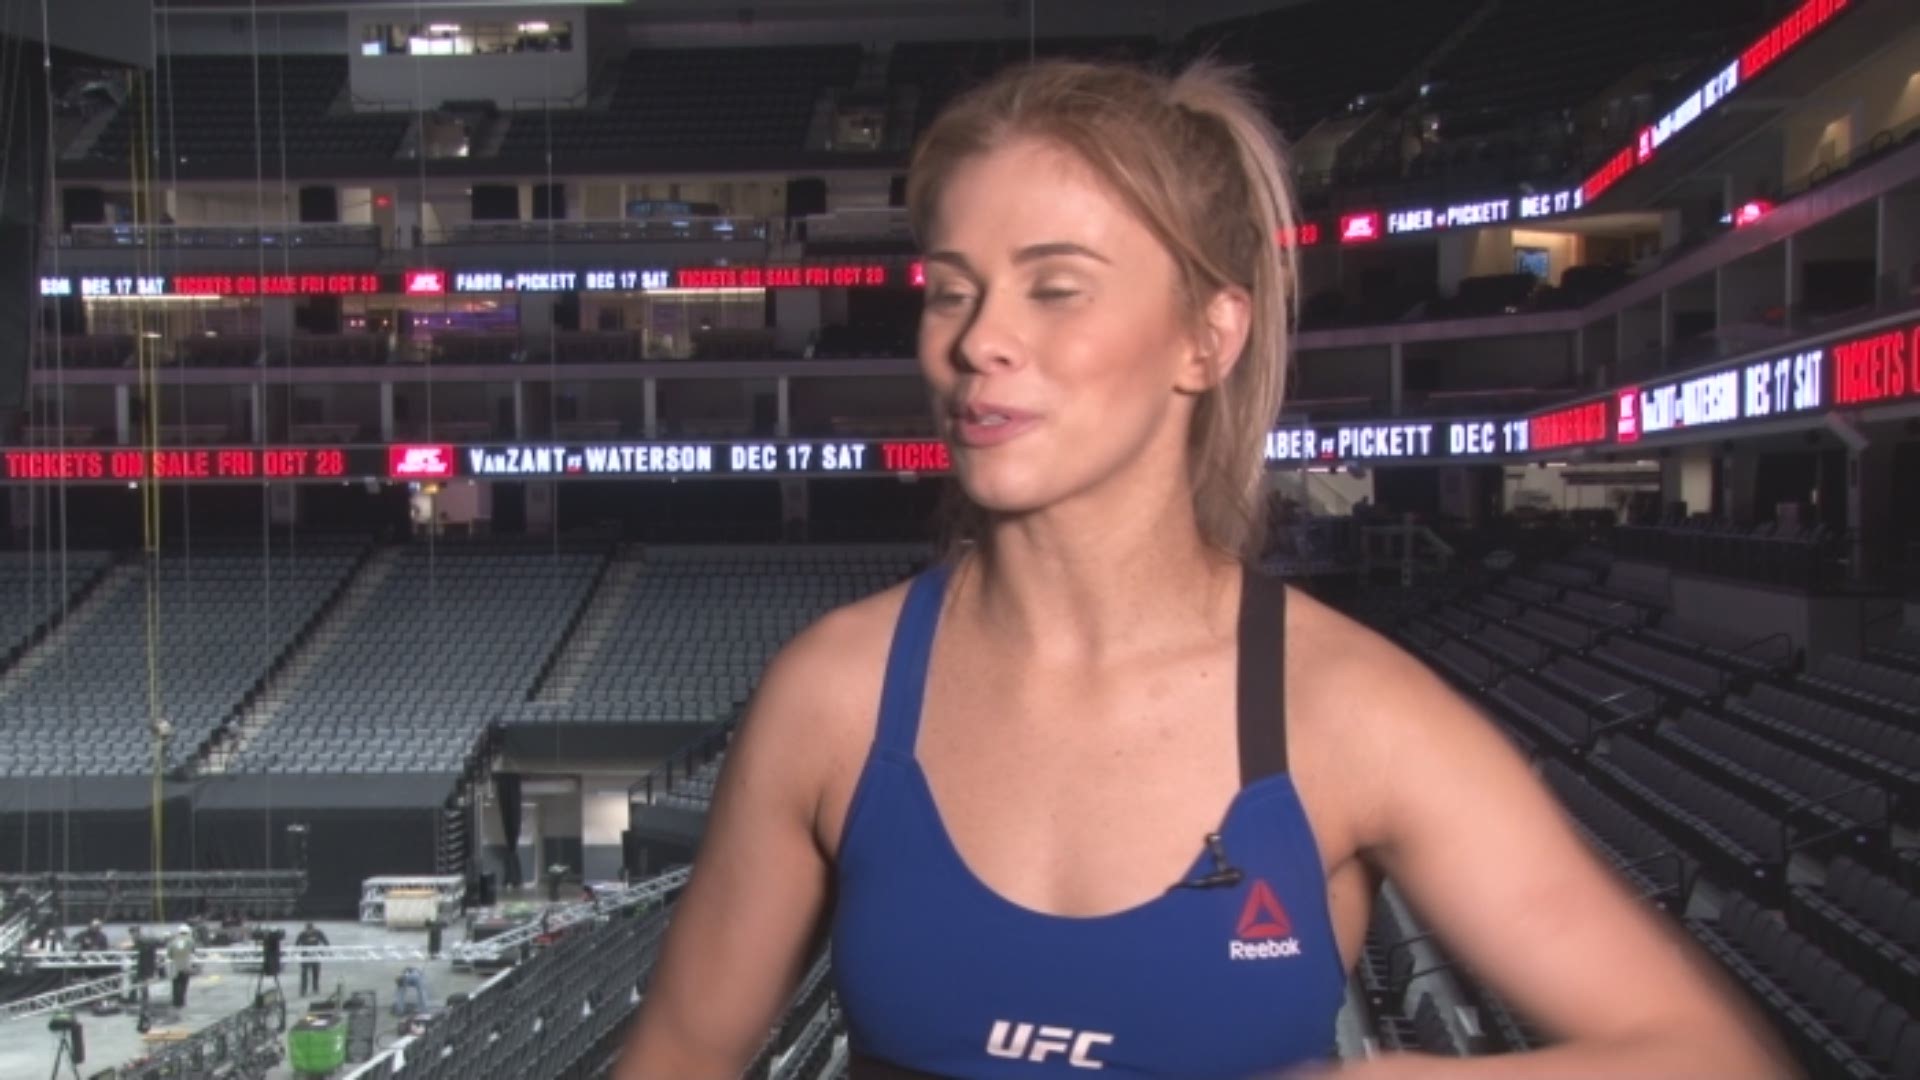 UFC star Paige VanZant, who trains and lives in Sacramento talks to ABC10's Sean Cunningham and Pierre Noujaim about headlining her first fight card at Golden 1 Center coming up on Saturday against Michelle Waterson.